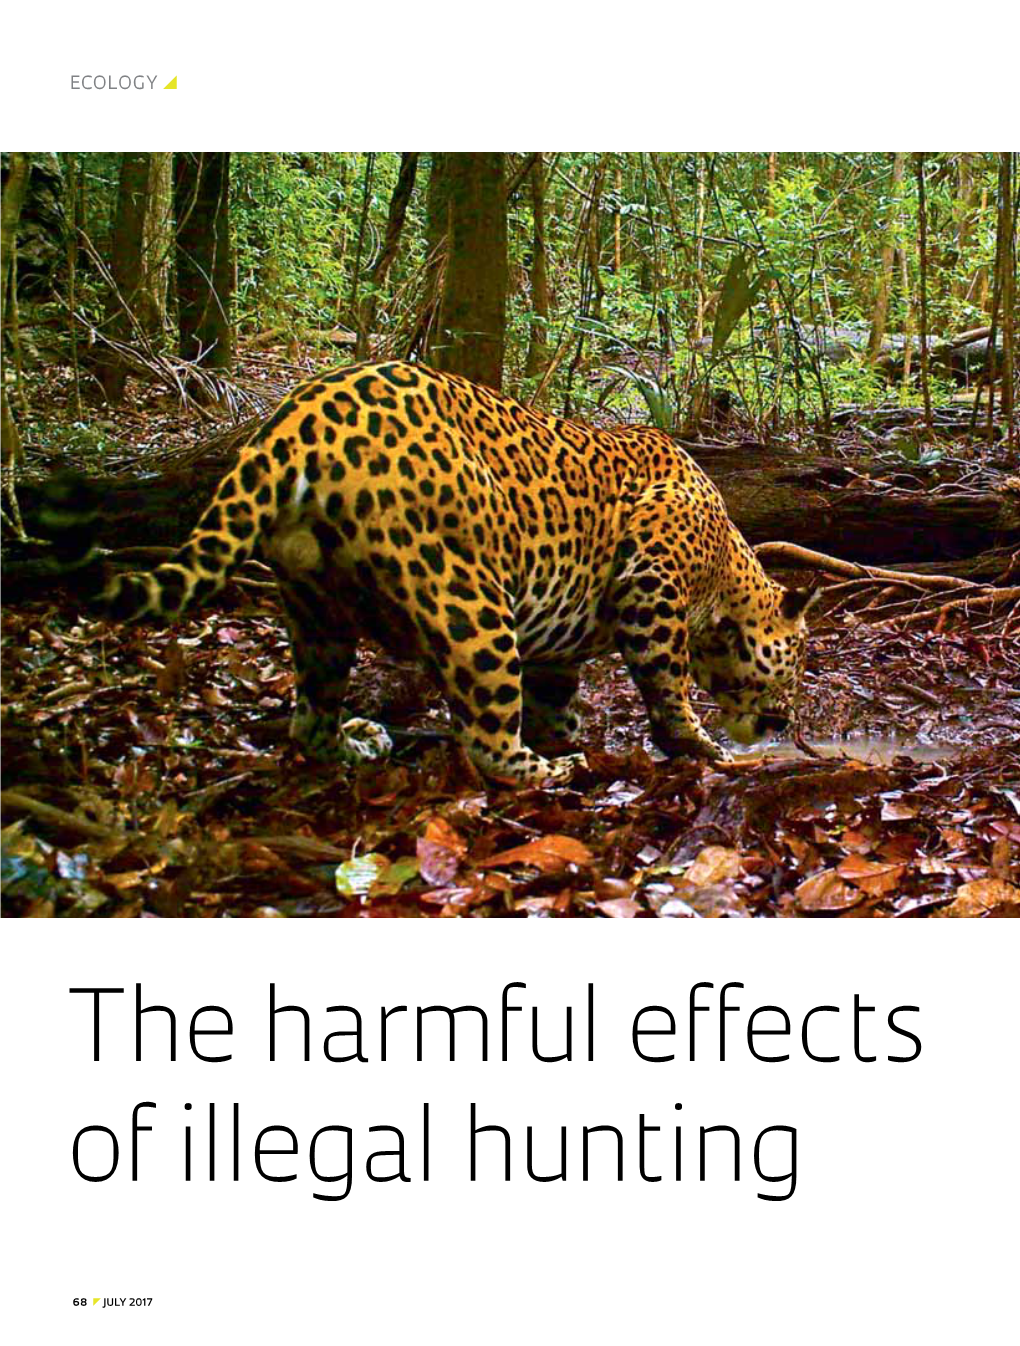 The Harmful Effects of Illegal Hunting